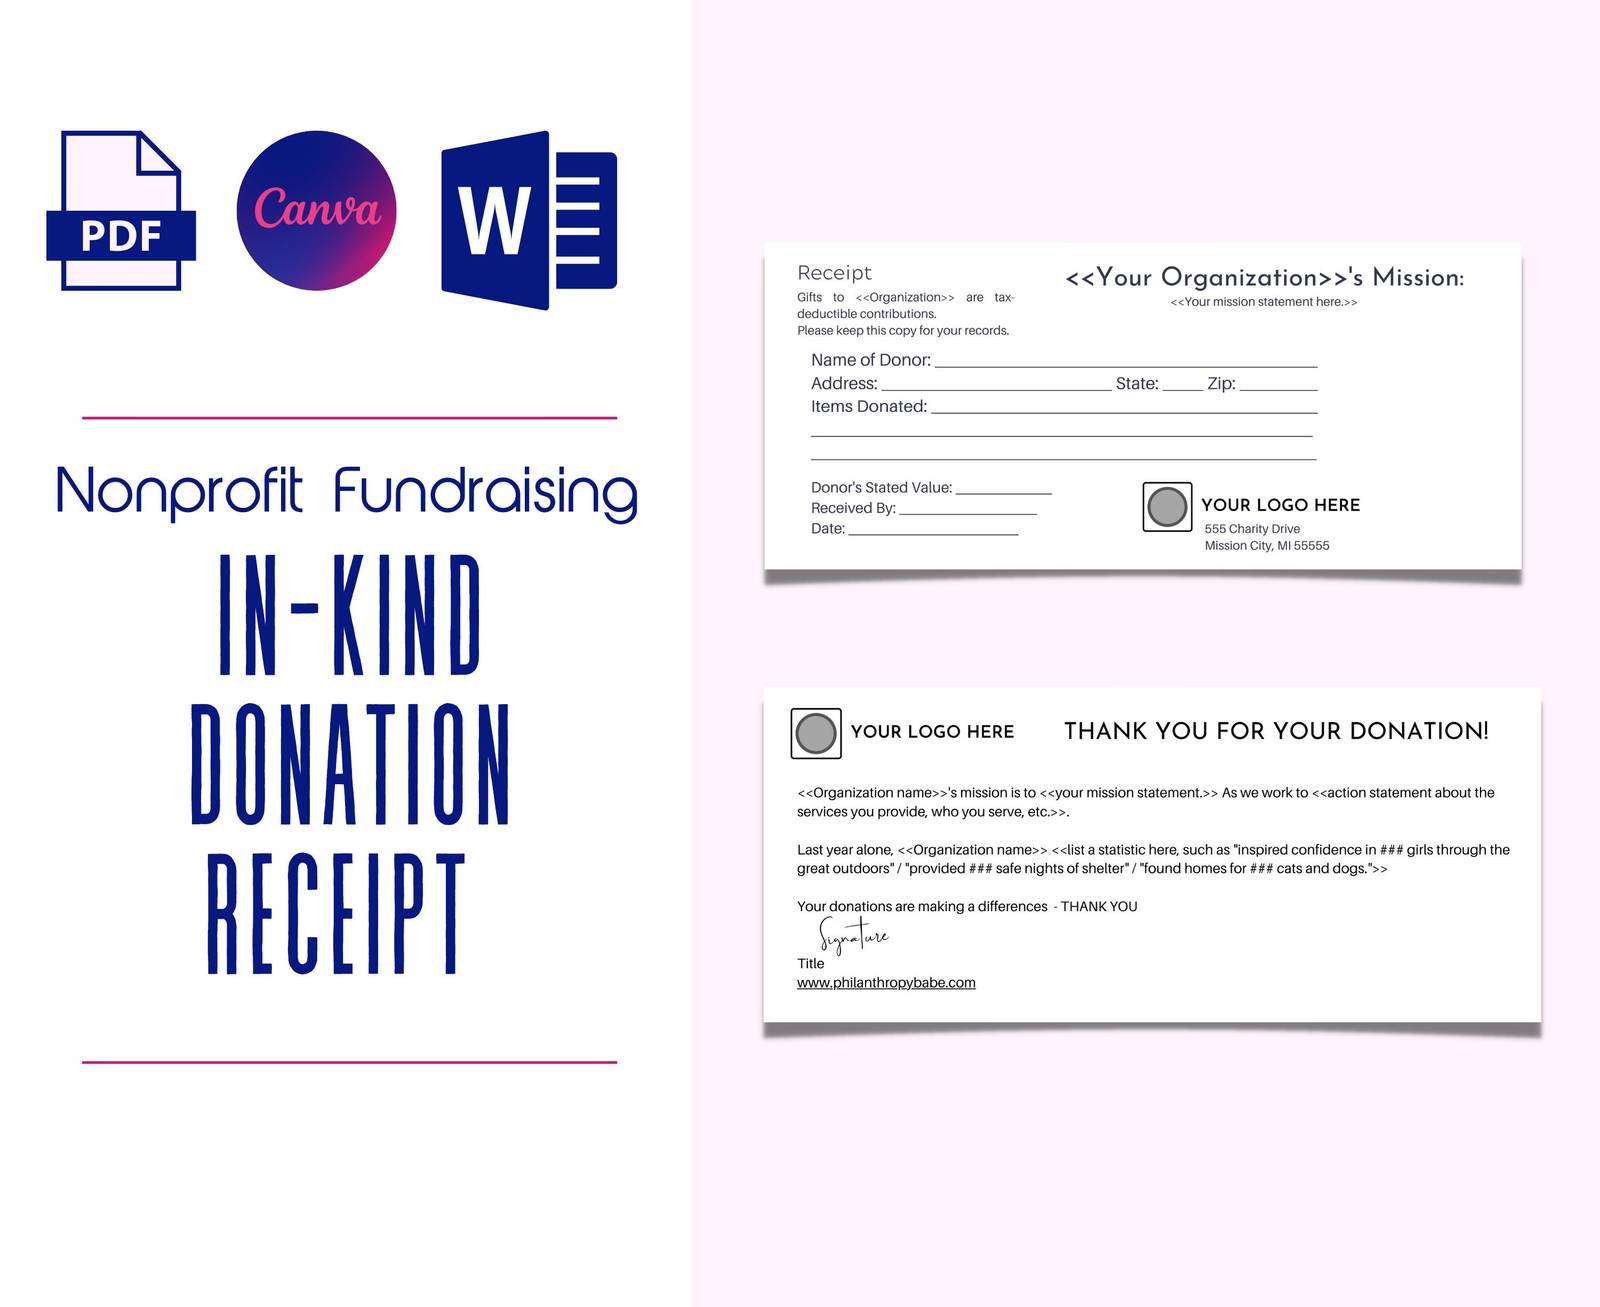 In-Kind Donation Receipt | Editable and customizable in Adobe, Canva, or Word